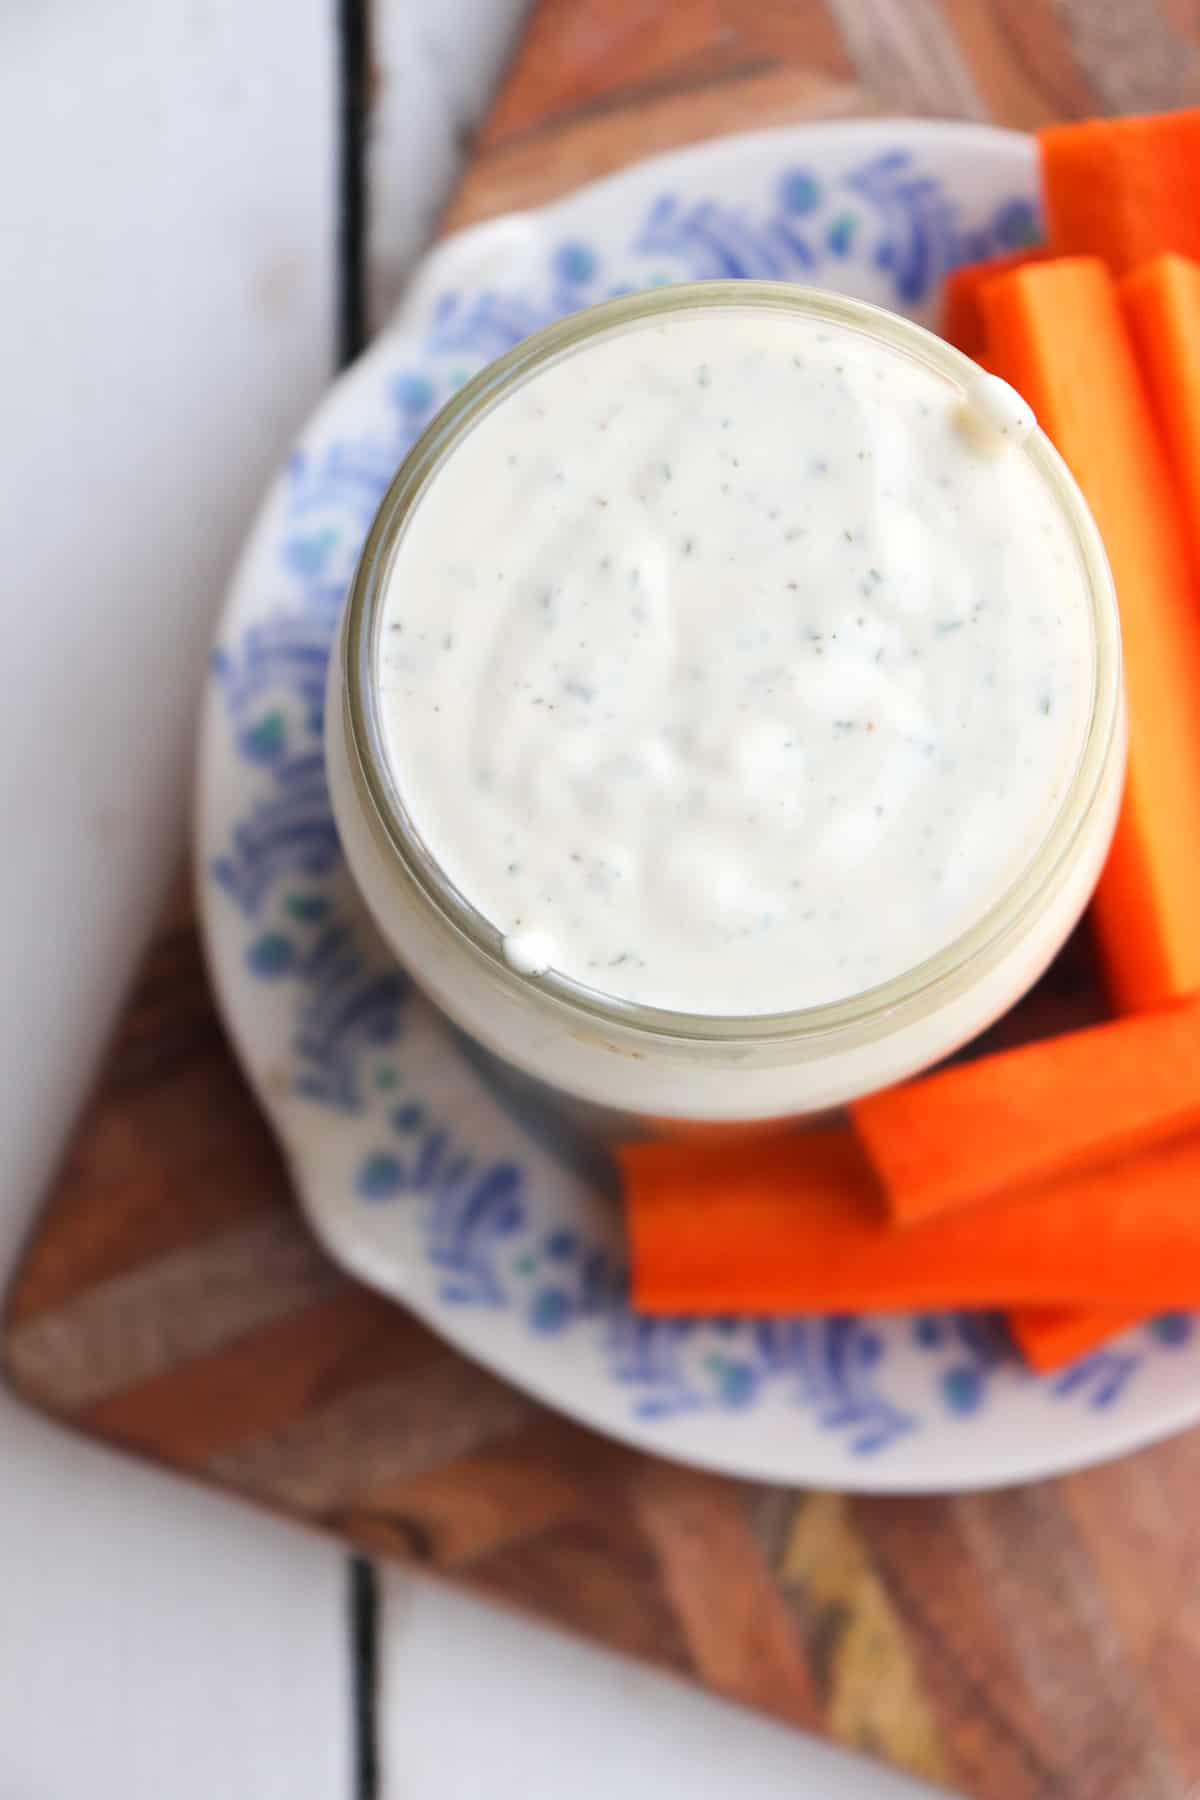 ranch in a glass jar with carrot sticks.